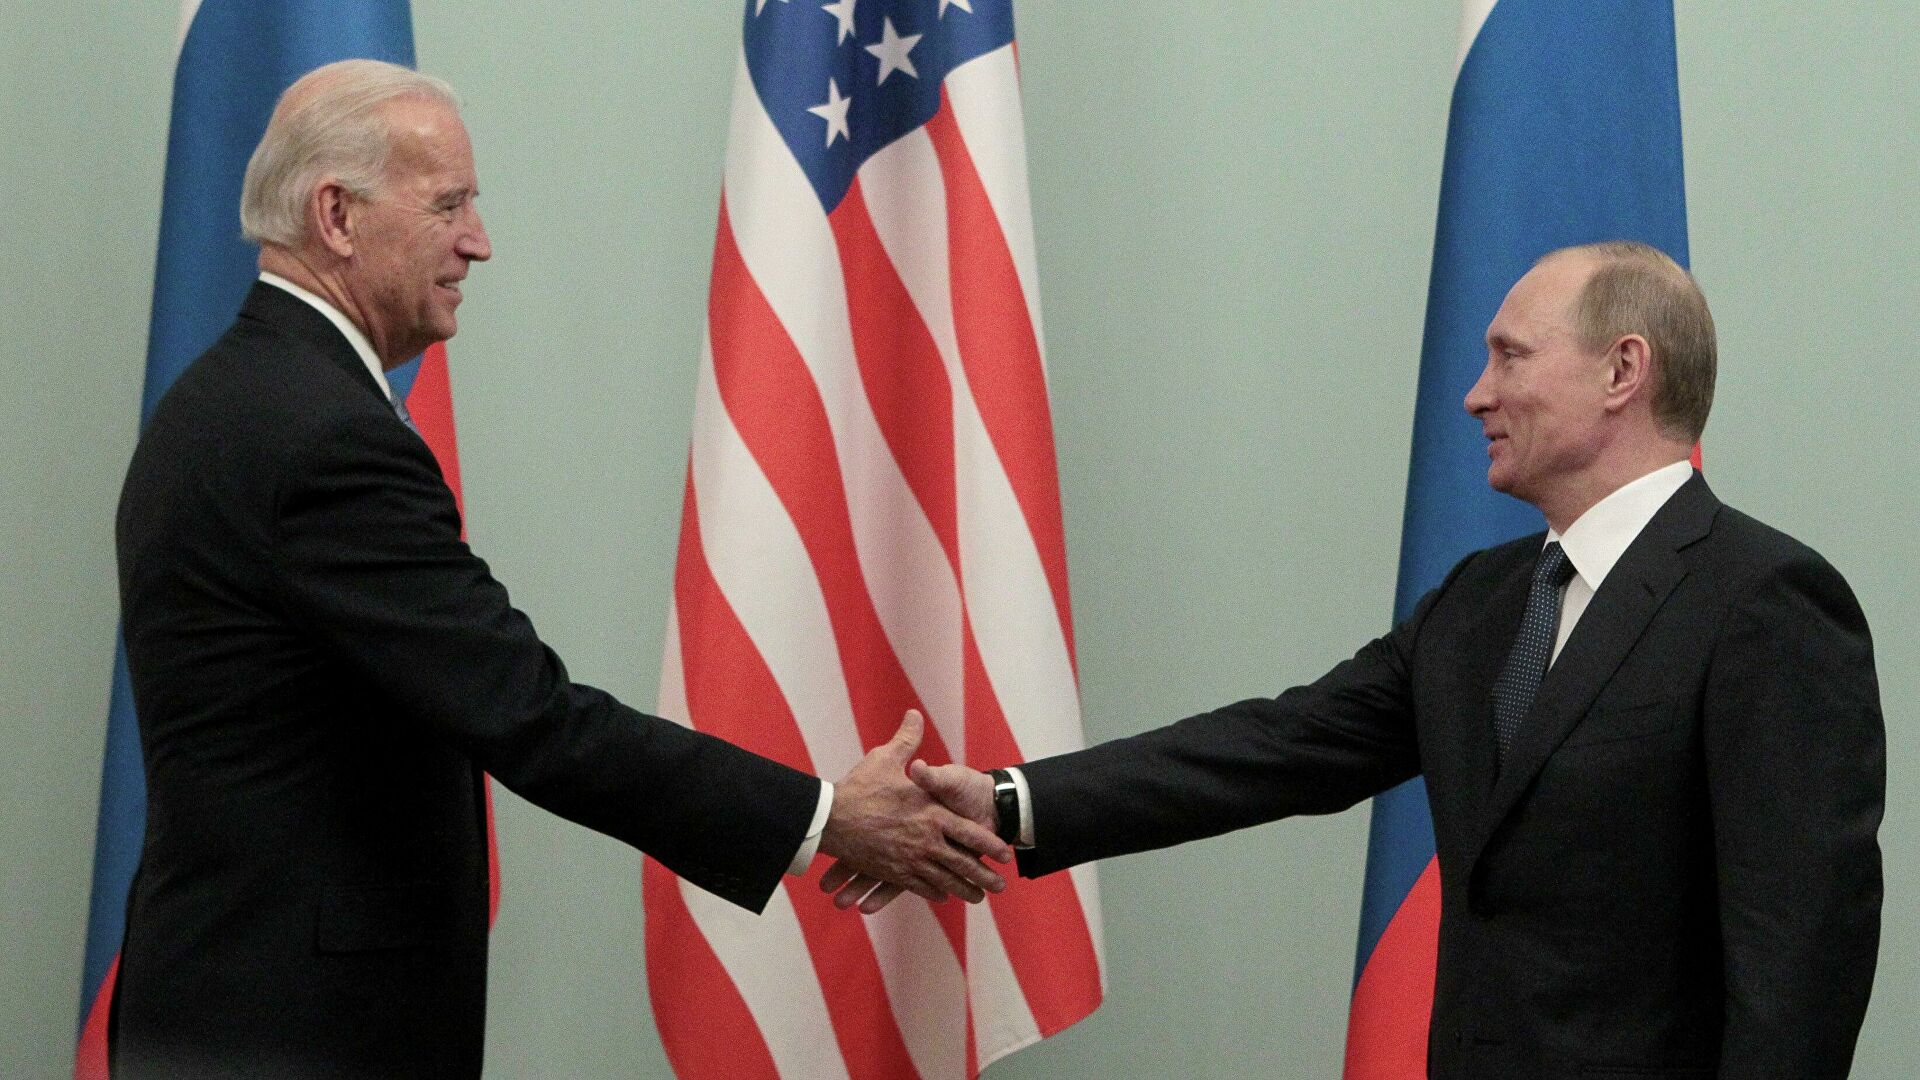 Biden spoke with Putin about Ukraine and offered to meet in a third country